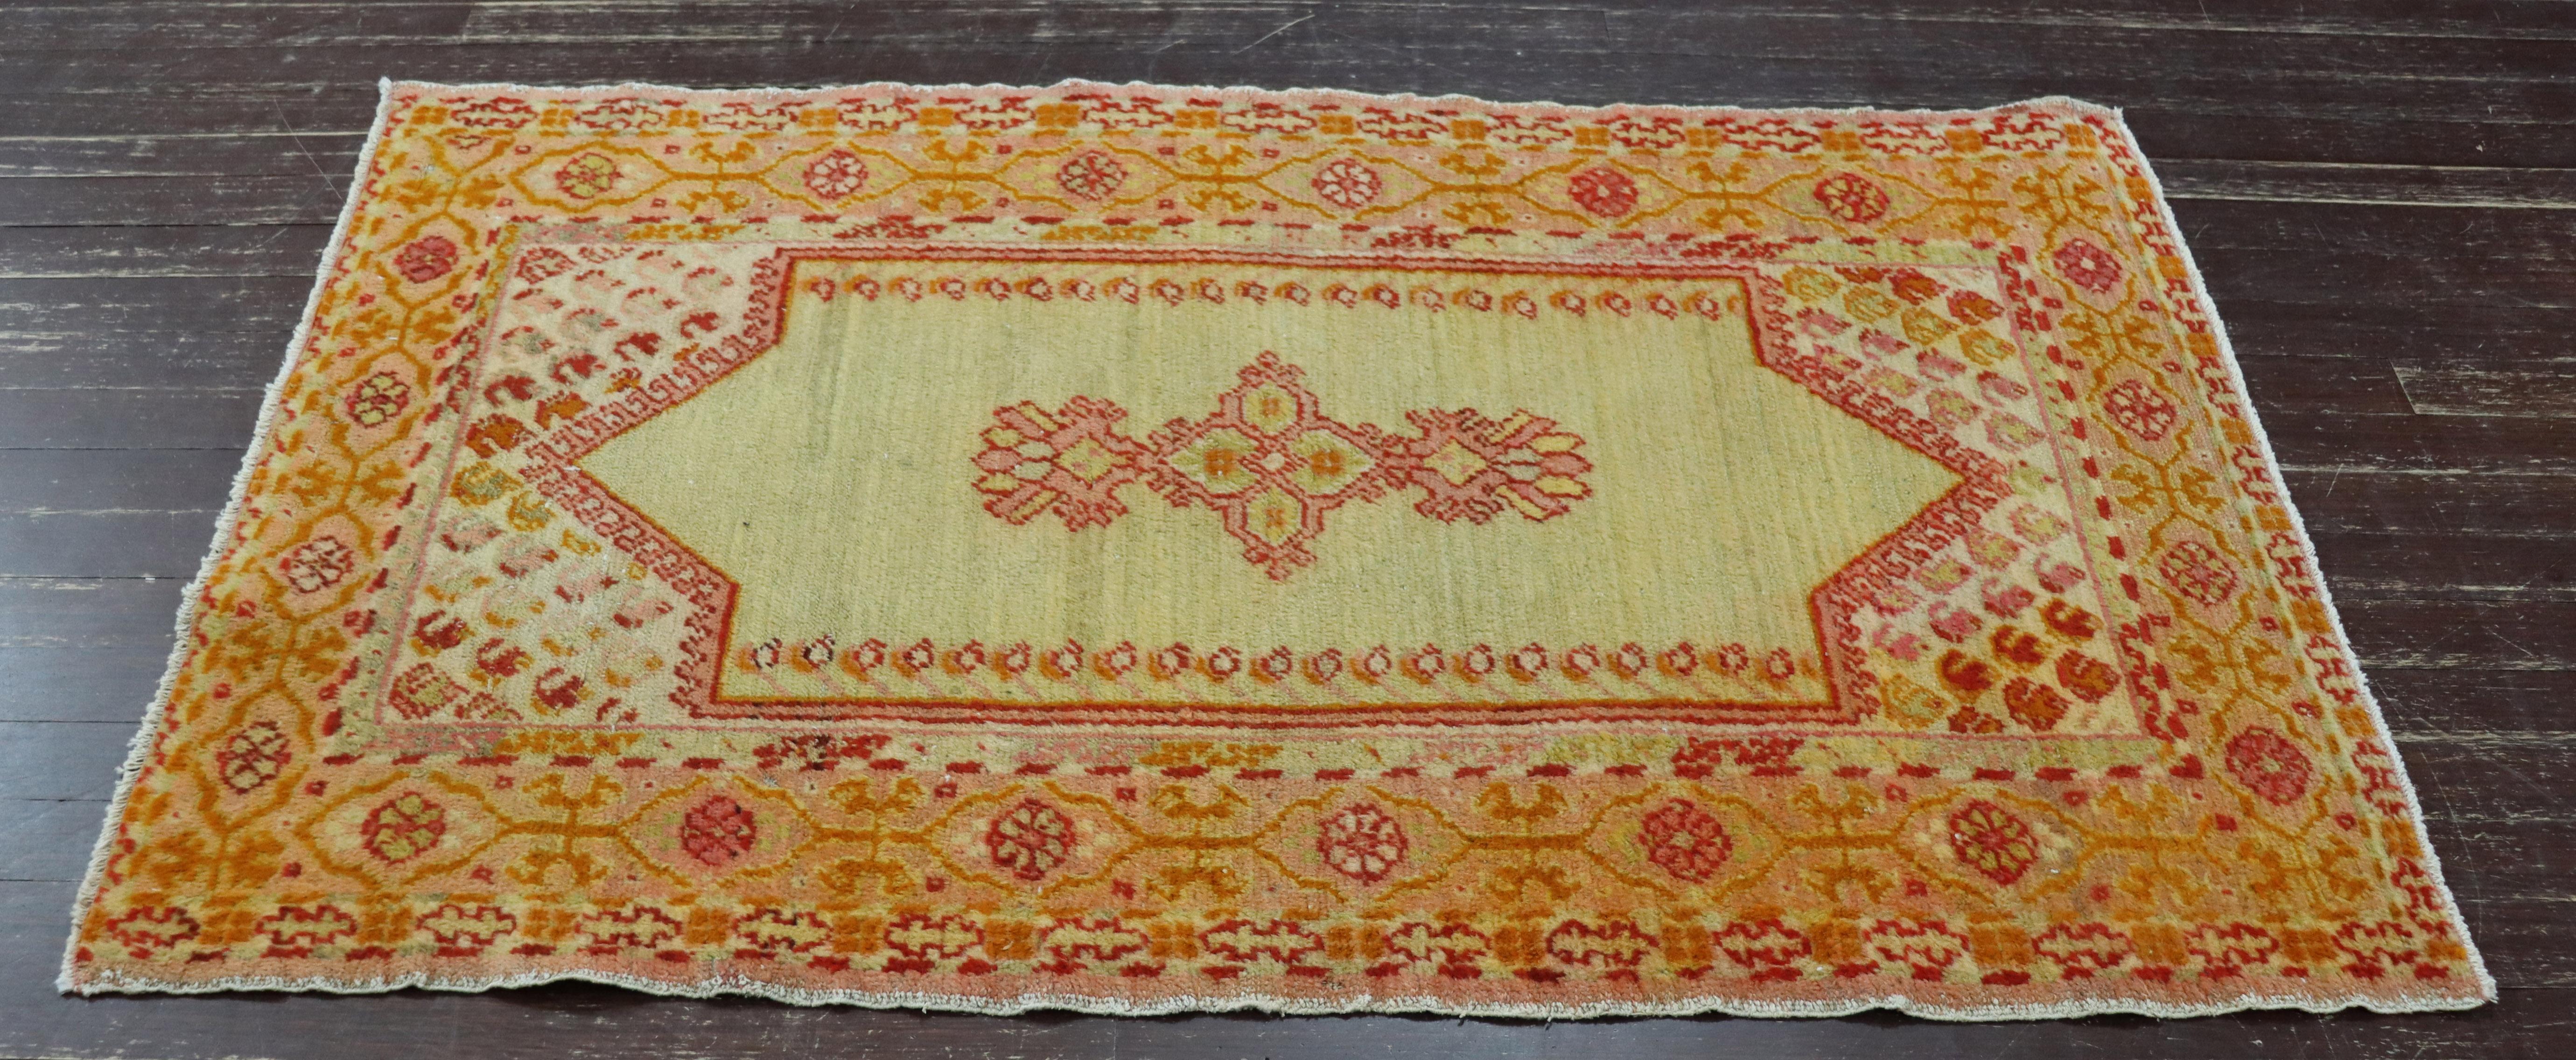 Antique Oushak Rug In Excellent Condition For Sale In Evanston, IL